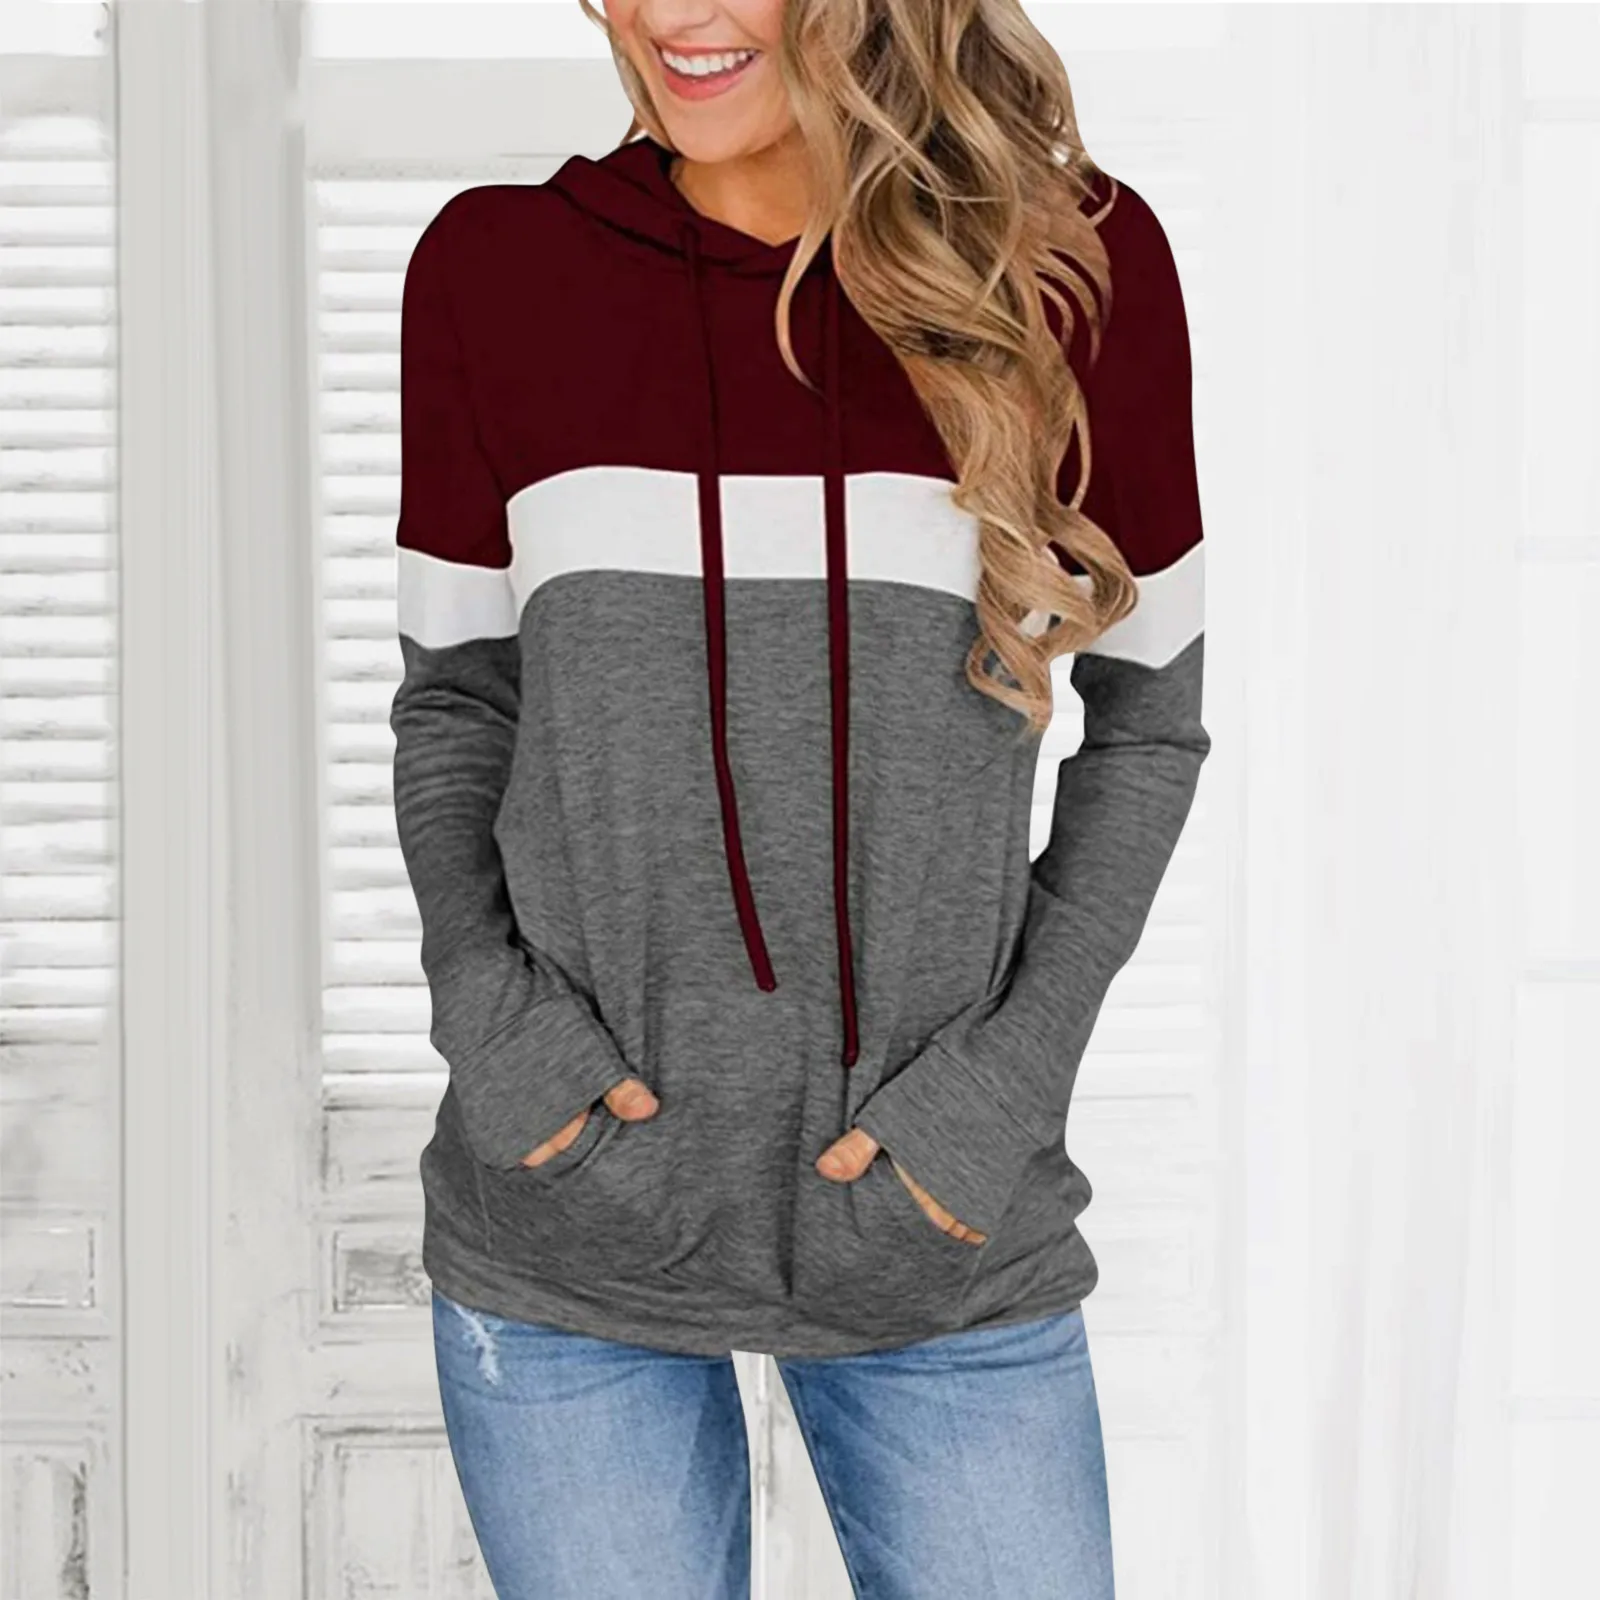 

Women's ound Neck Tops Long Sleeve Casual Color Splice Drawstring Hoodies Blouse Knitted Hoodie Long Tunic Hoodies Women